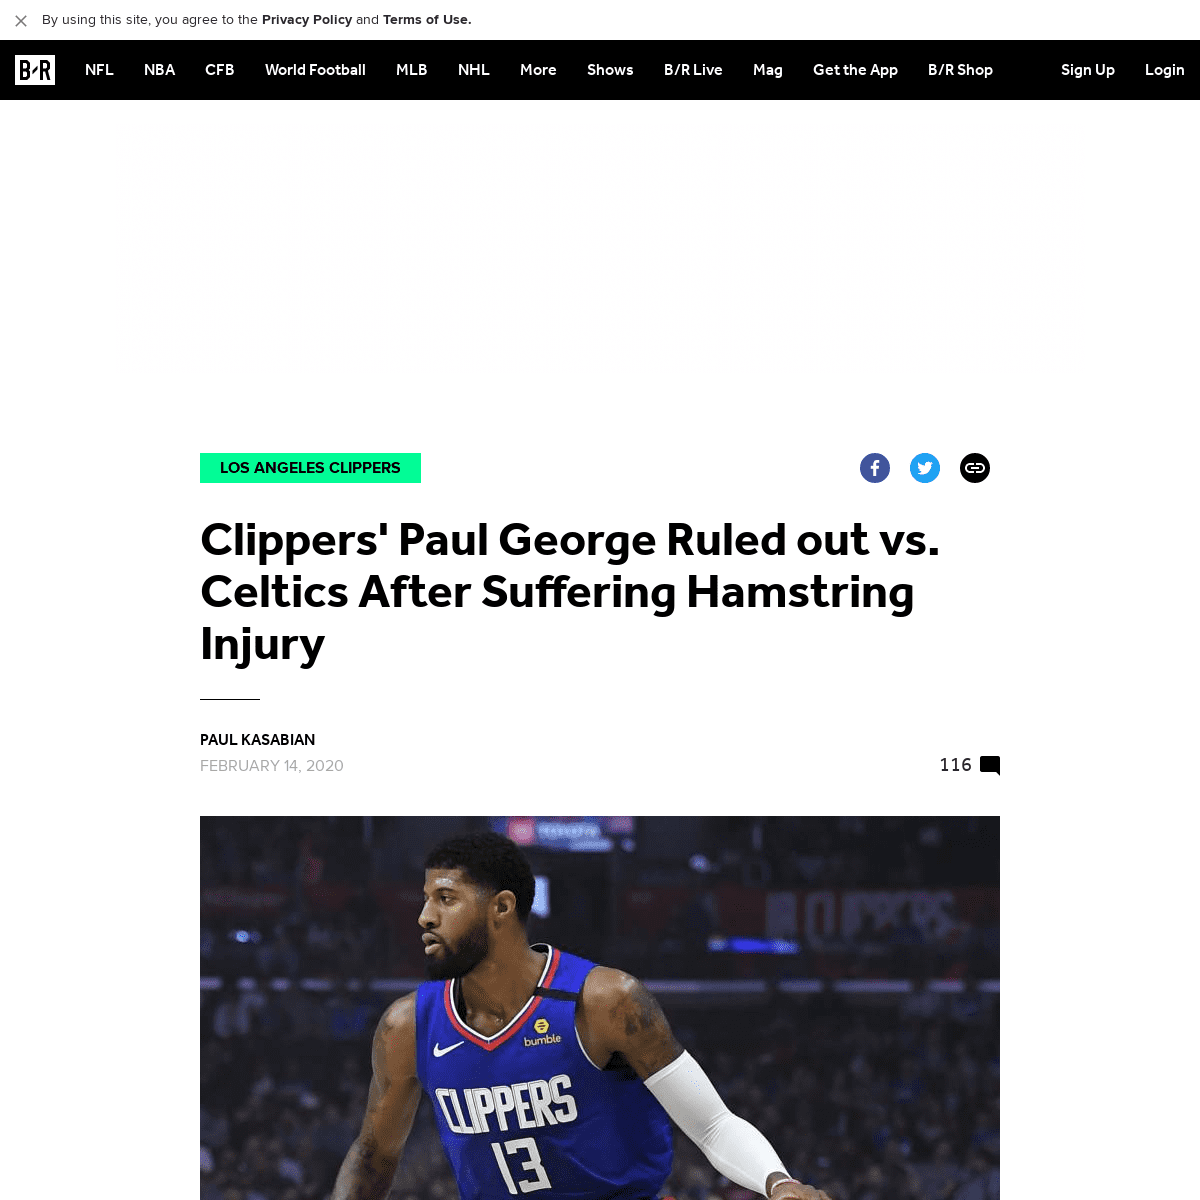 A complete backup of bleacherreport.com/articles/2870747-clippers-paul-george-ruled-out-vs-celtics-after-suffering-hamstring-inj